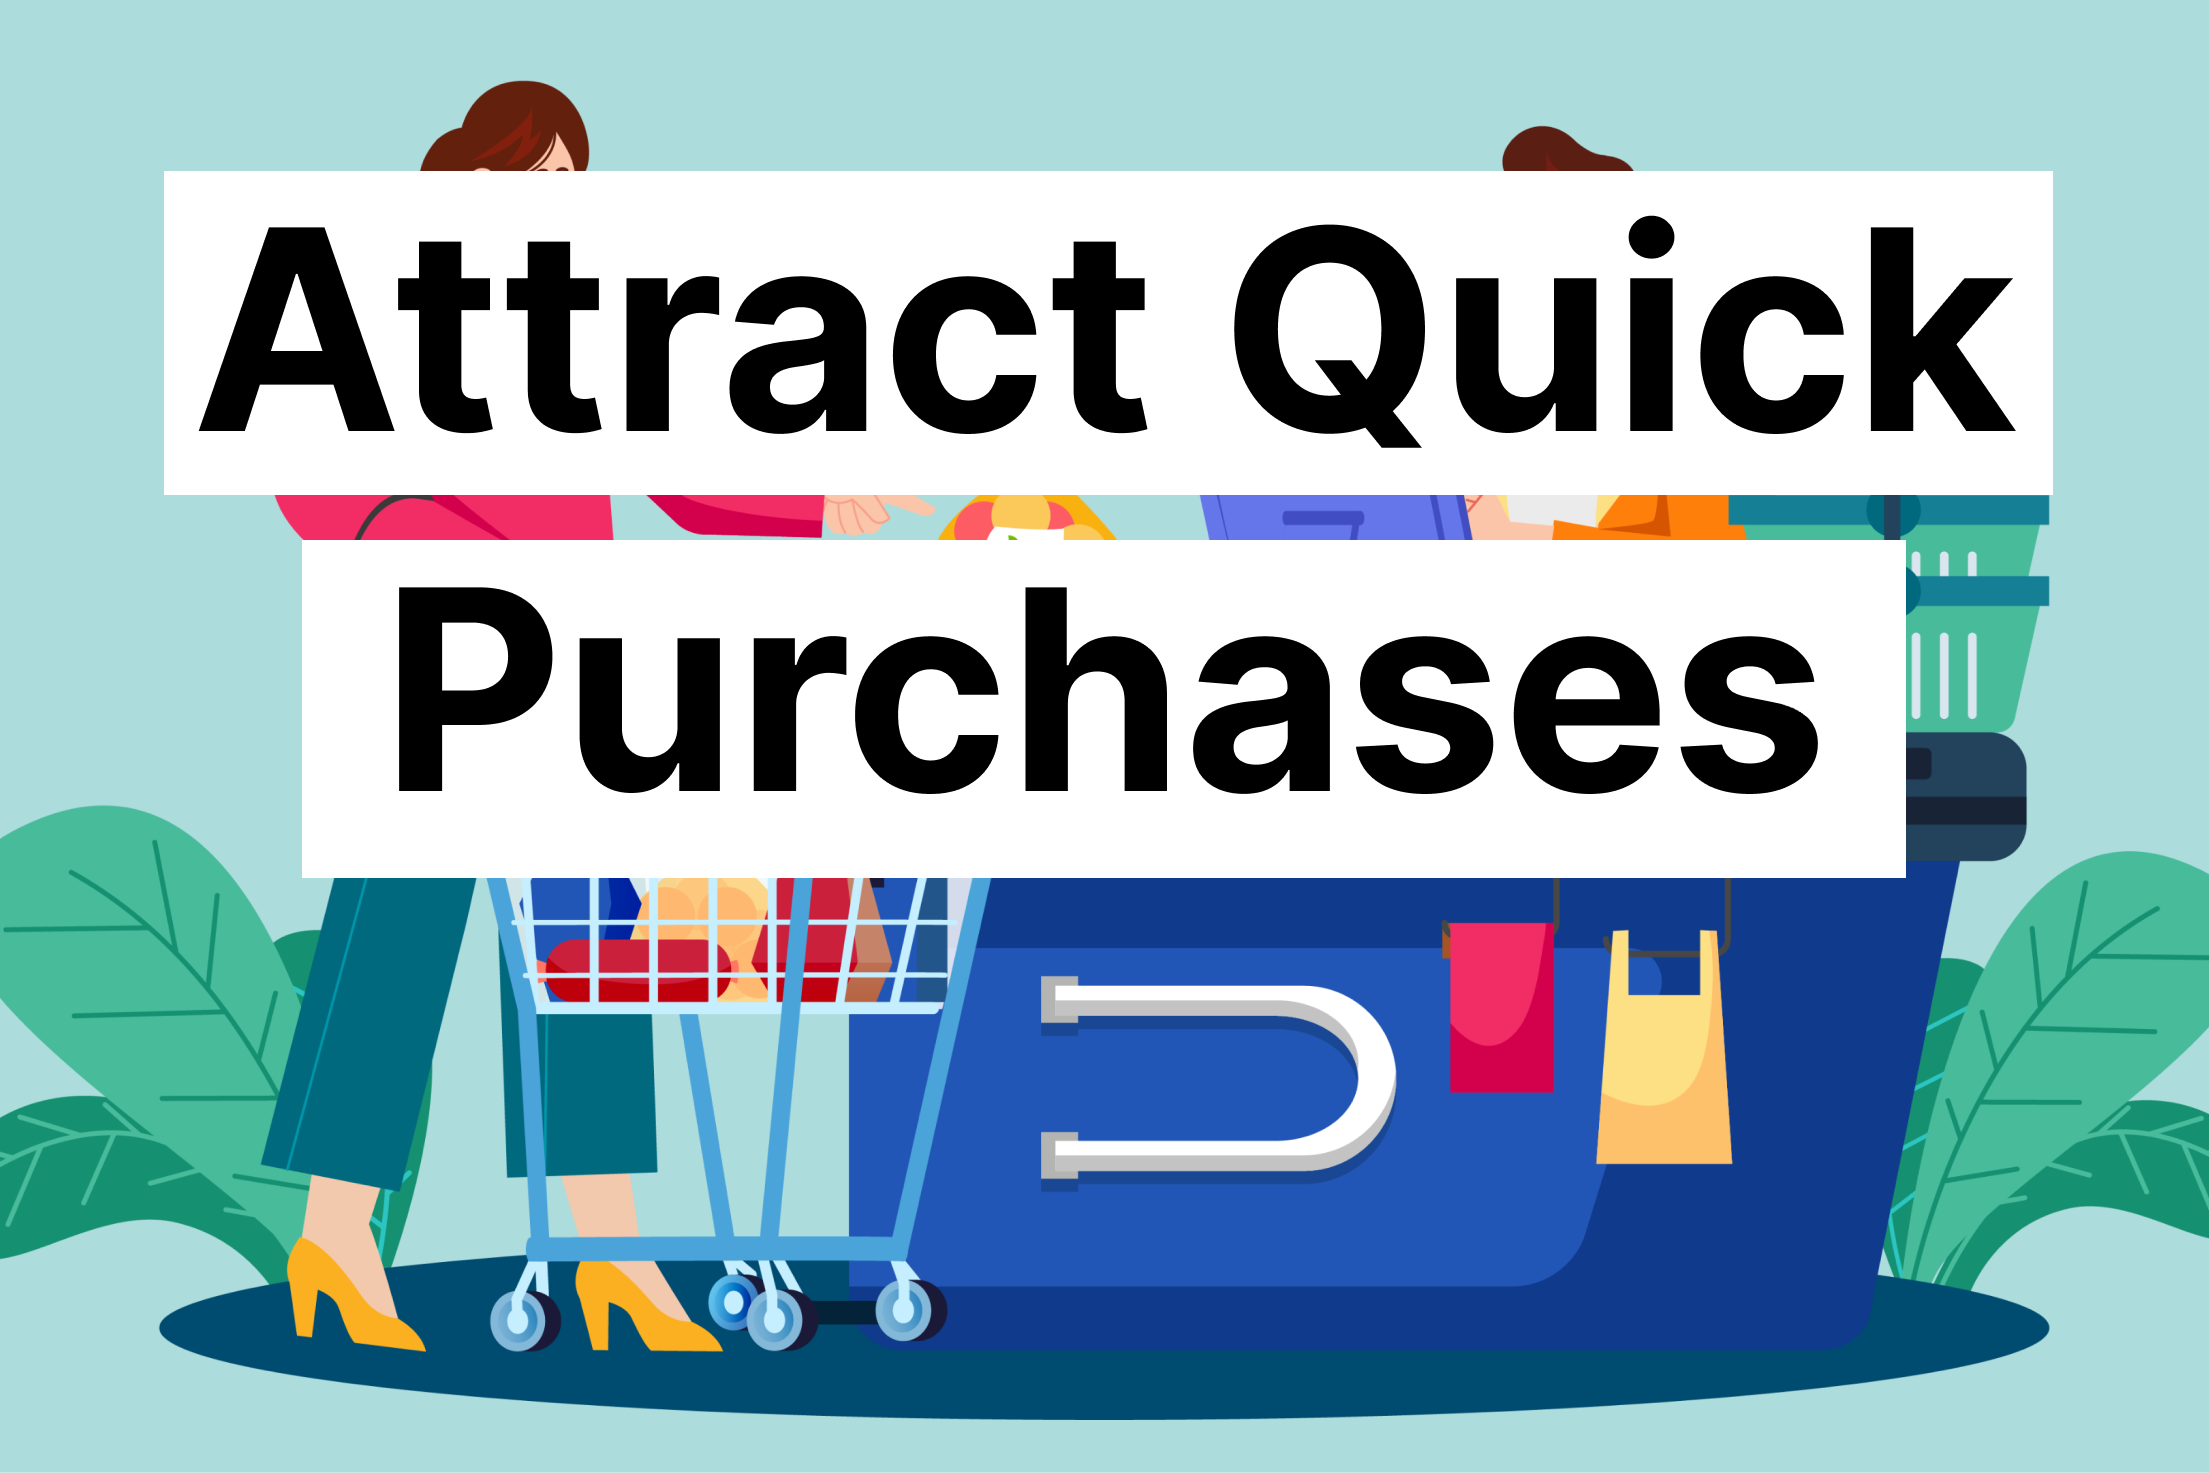 6 Ways to Attract Last Minute Purchases at the Register